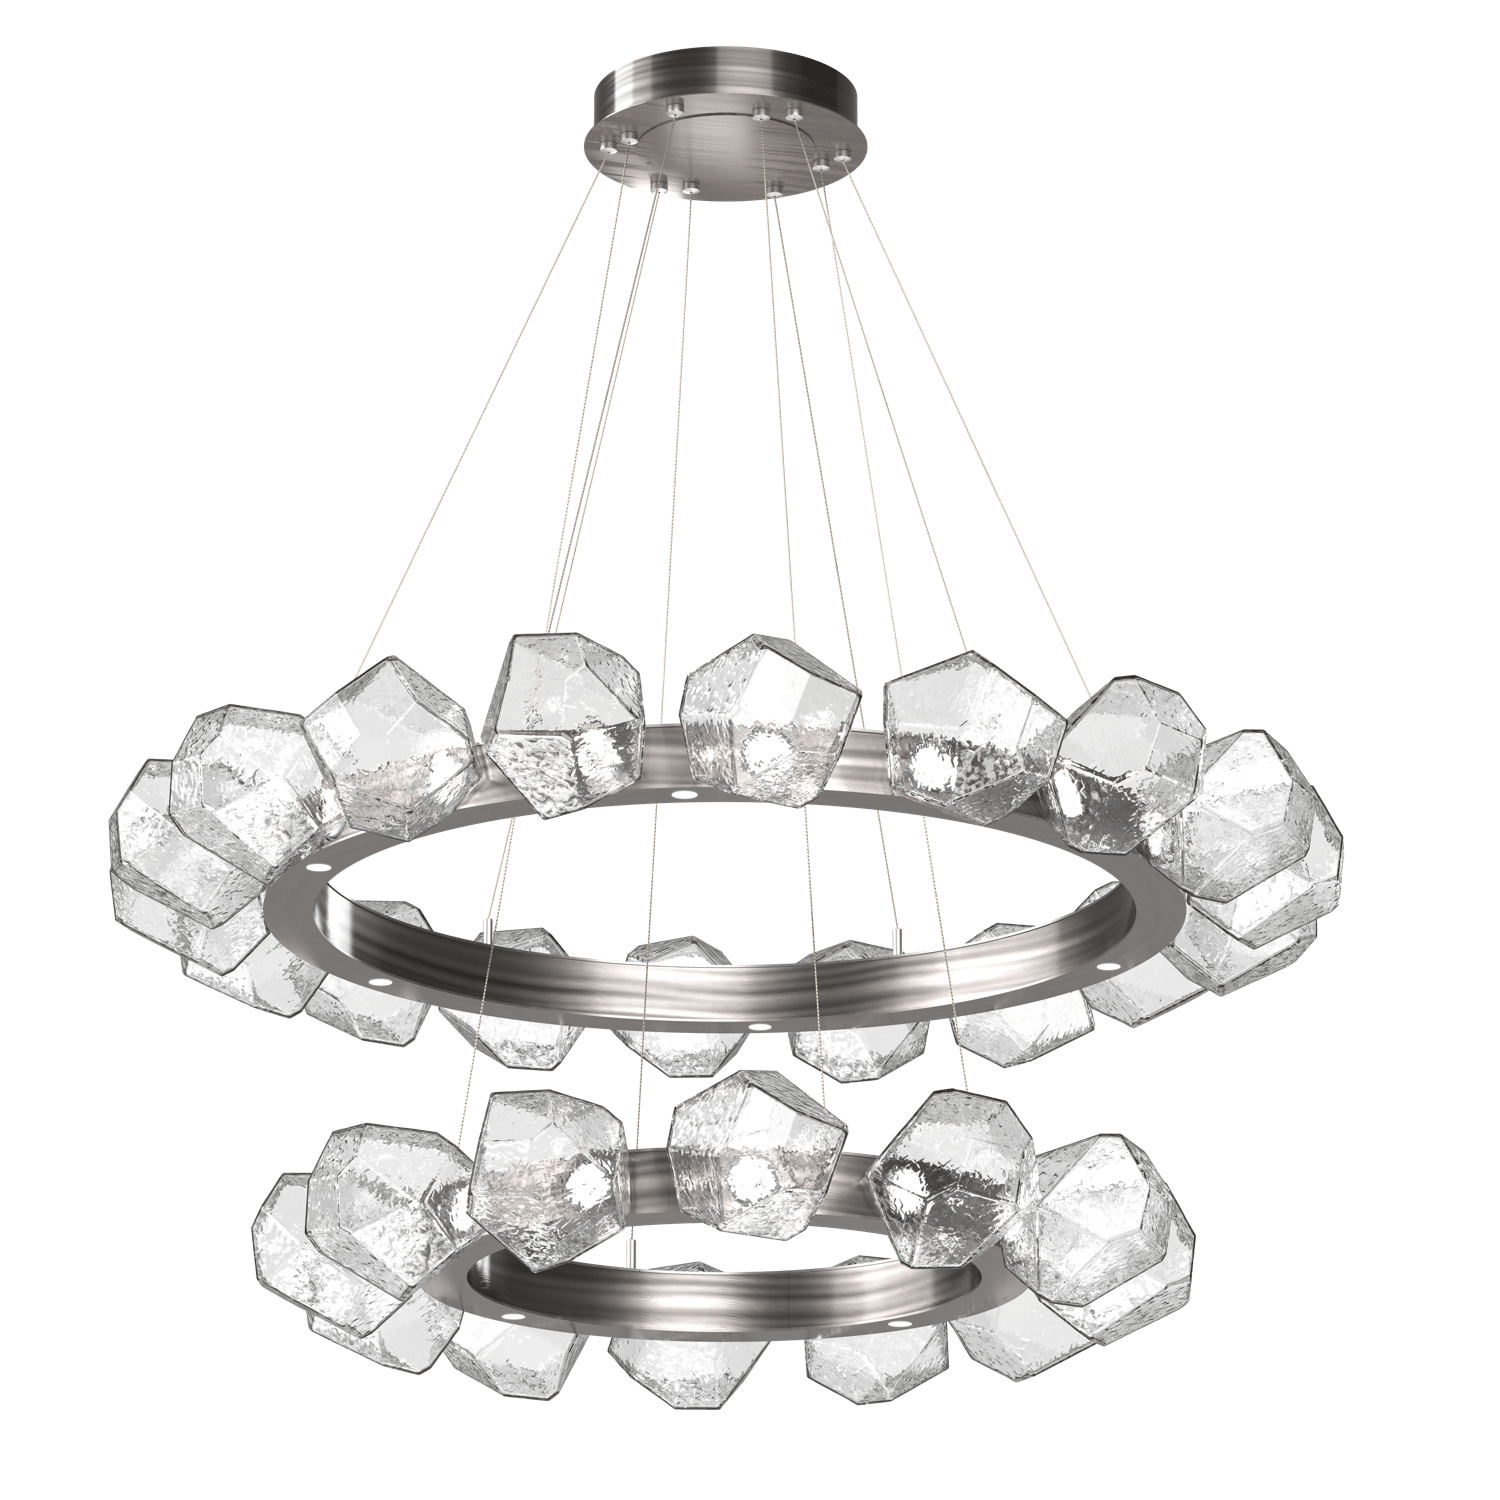 CHB0039-2T-GM-C-Hammerton-Studio-Gem-48-inch-two-tier-radial-ring-chandelier-with-gunmetal-finish-and-clear-blown-glass-shades-and-LED-lamping